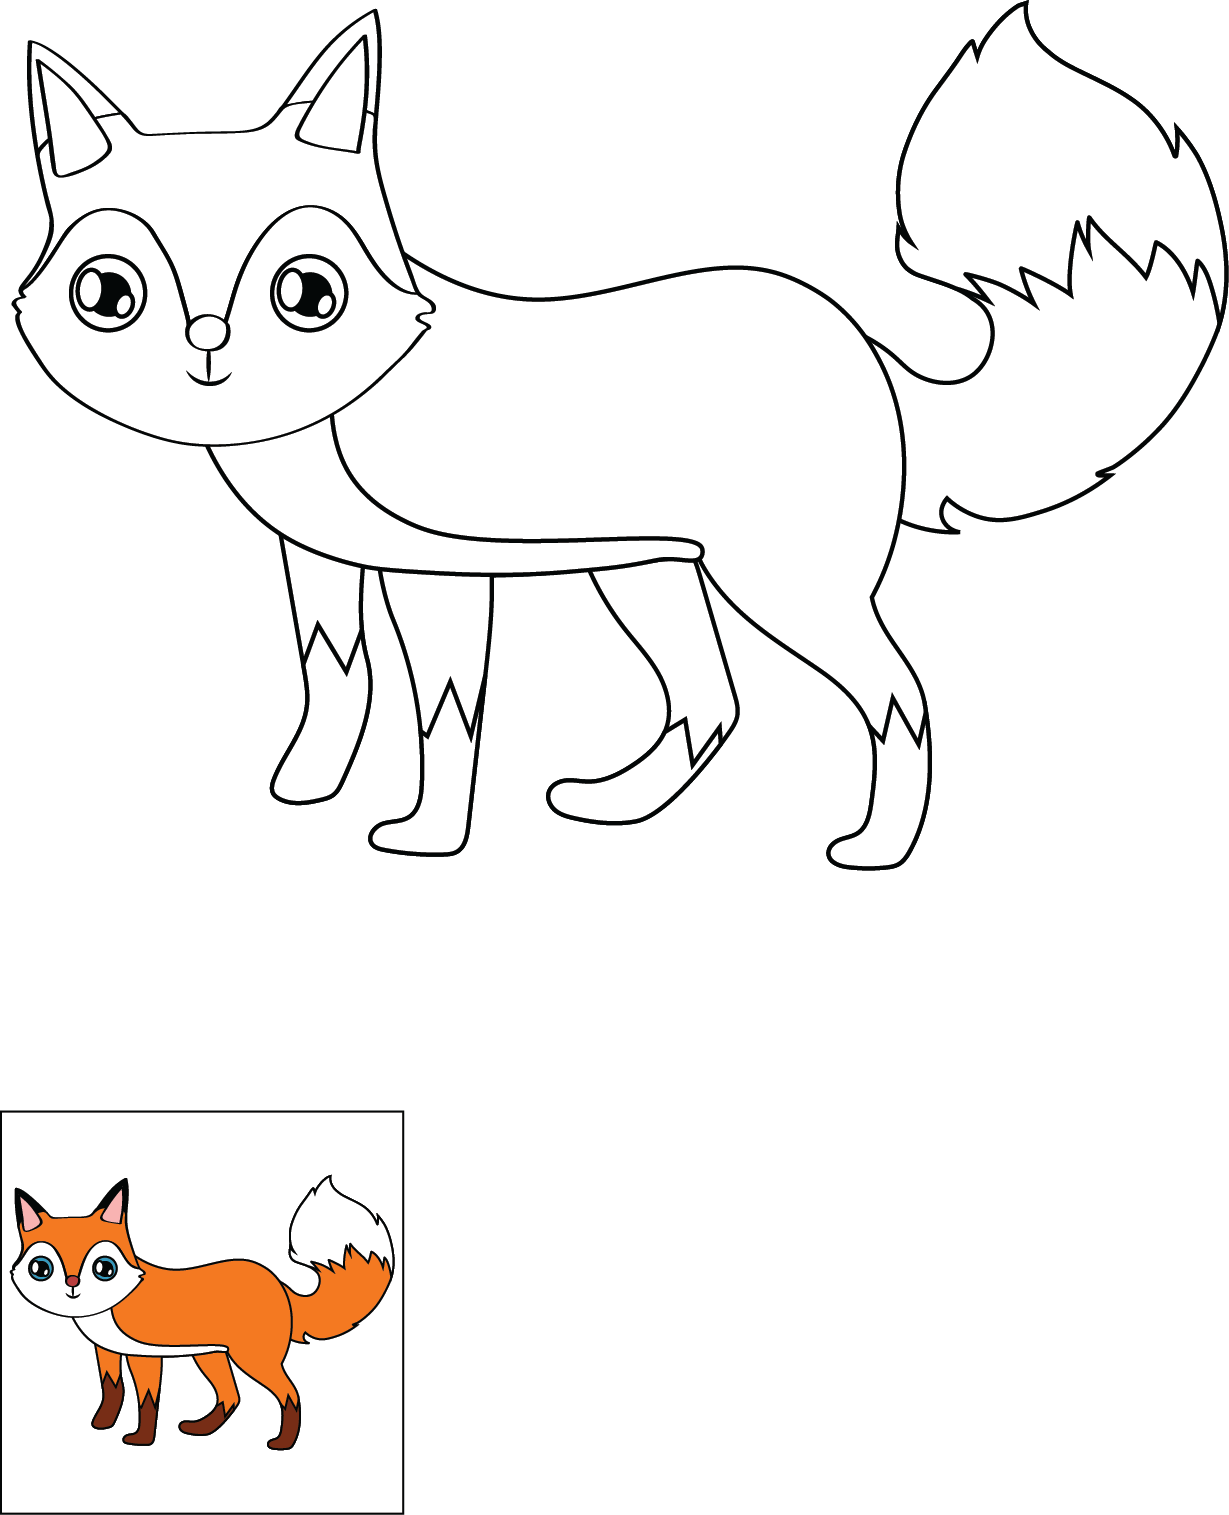 How to Draw A Fox Step by Step Printable Color